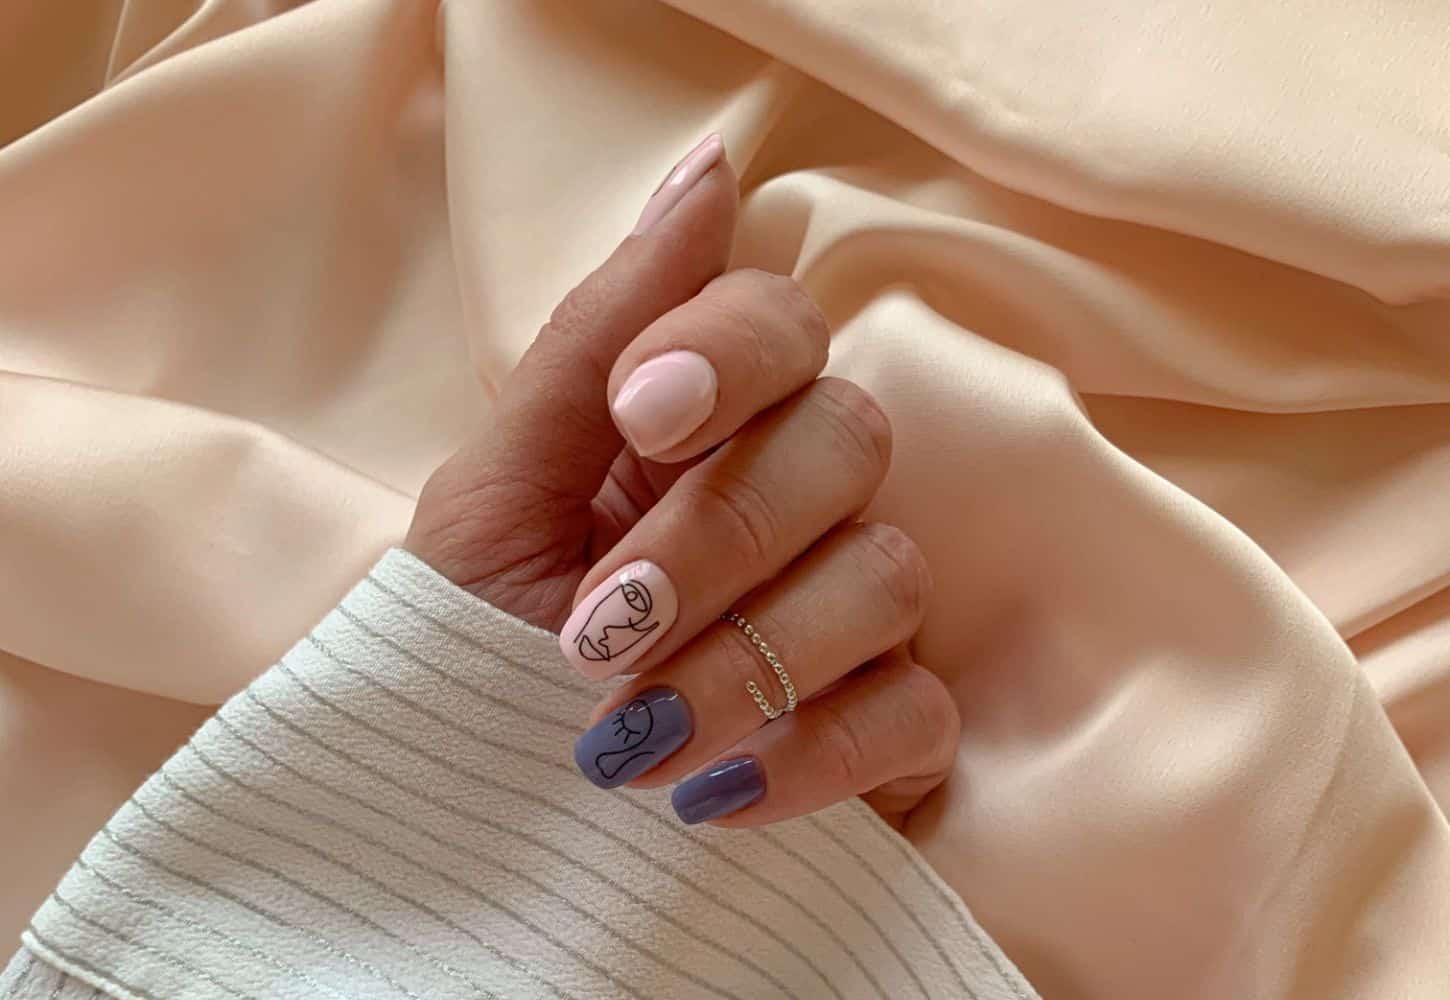 Nail Art Inspiration: 10 Creative Designs to Try at Home